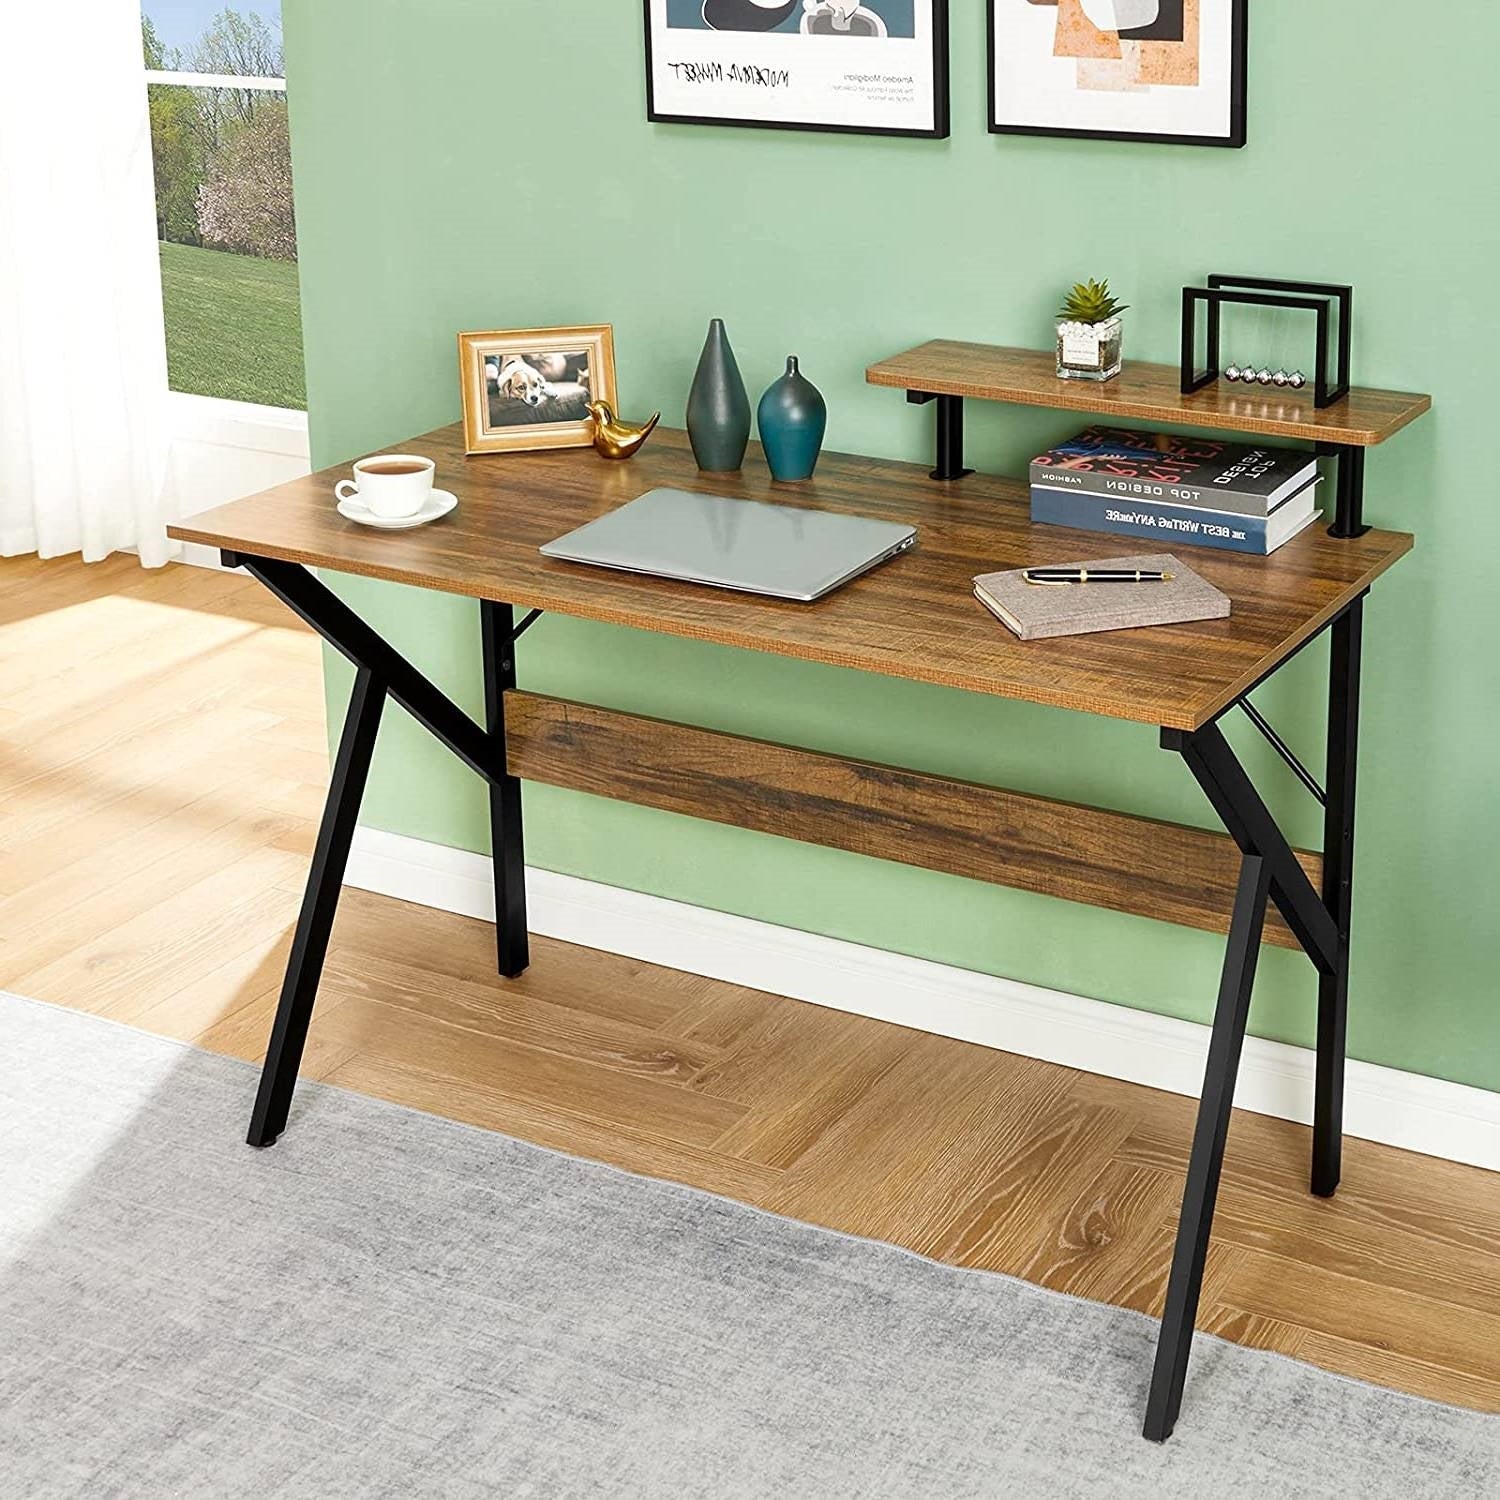 Office > Computer Desks - Modern 47-inch Home Office Laptop Computer Desk With Moveable Top Shelf